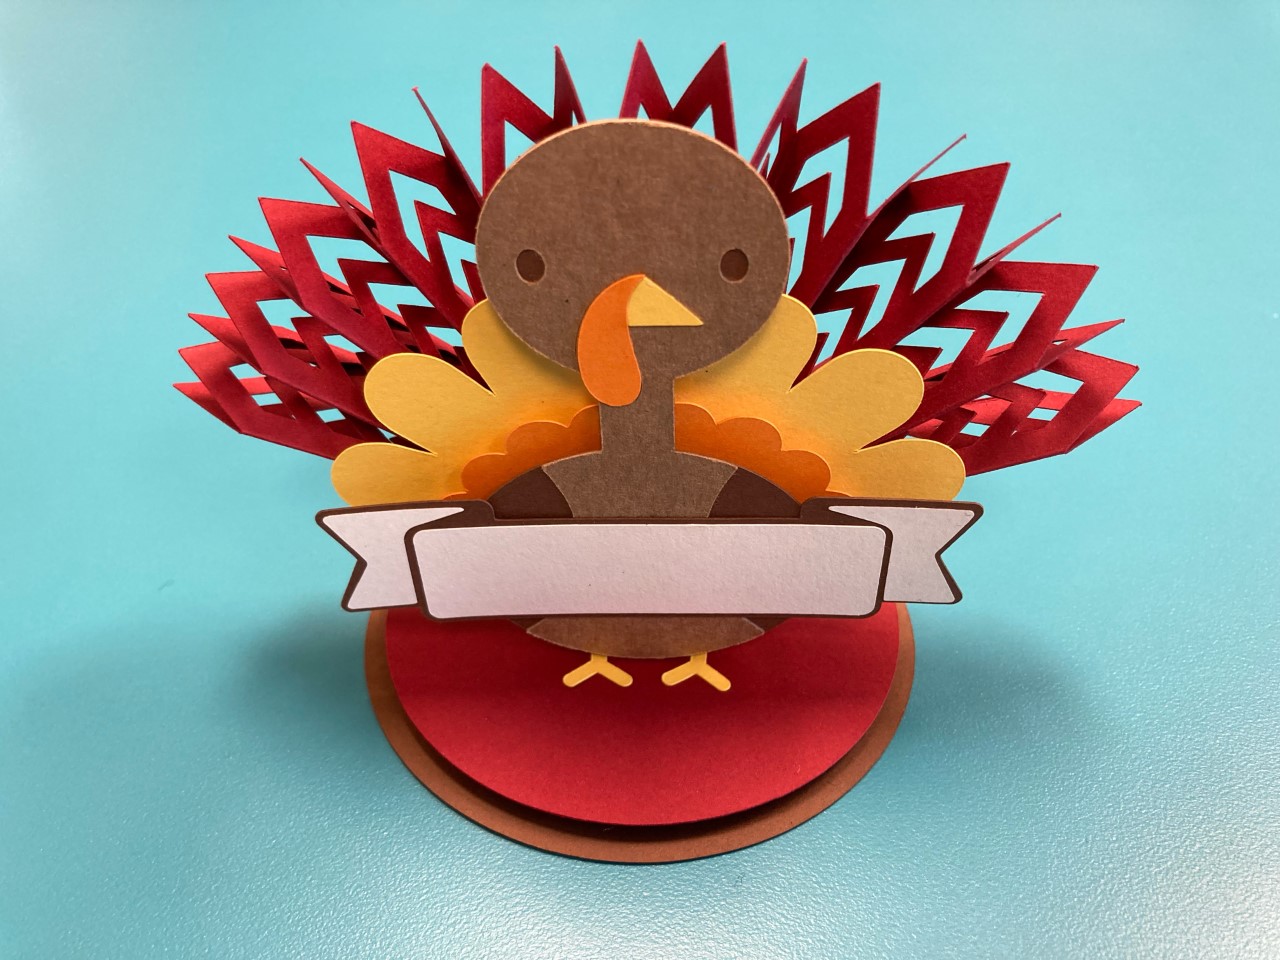 placecard for a table in the shape of a paper turkey